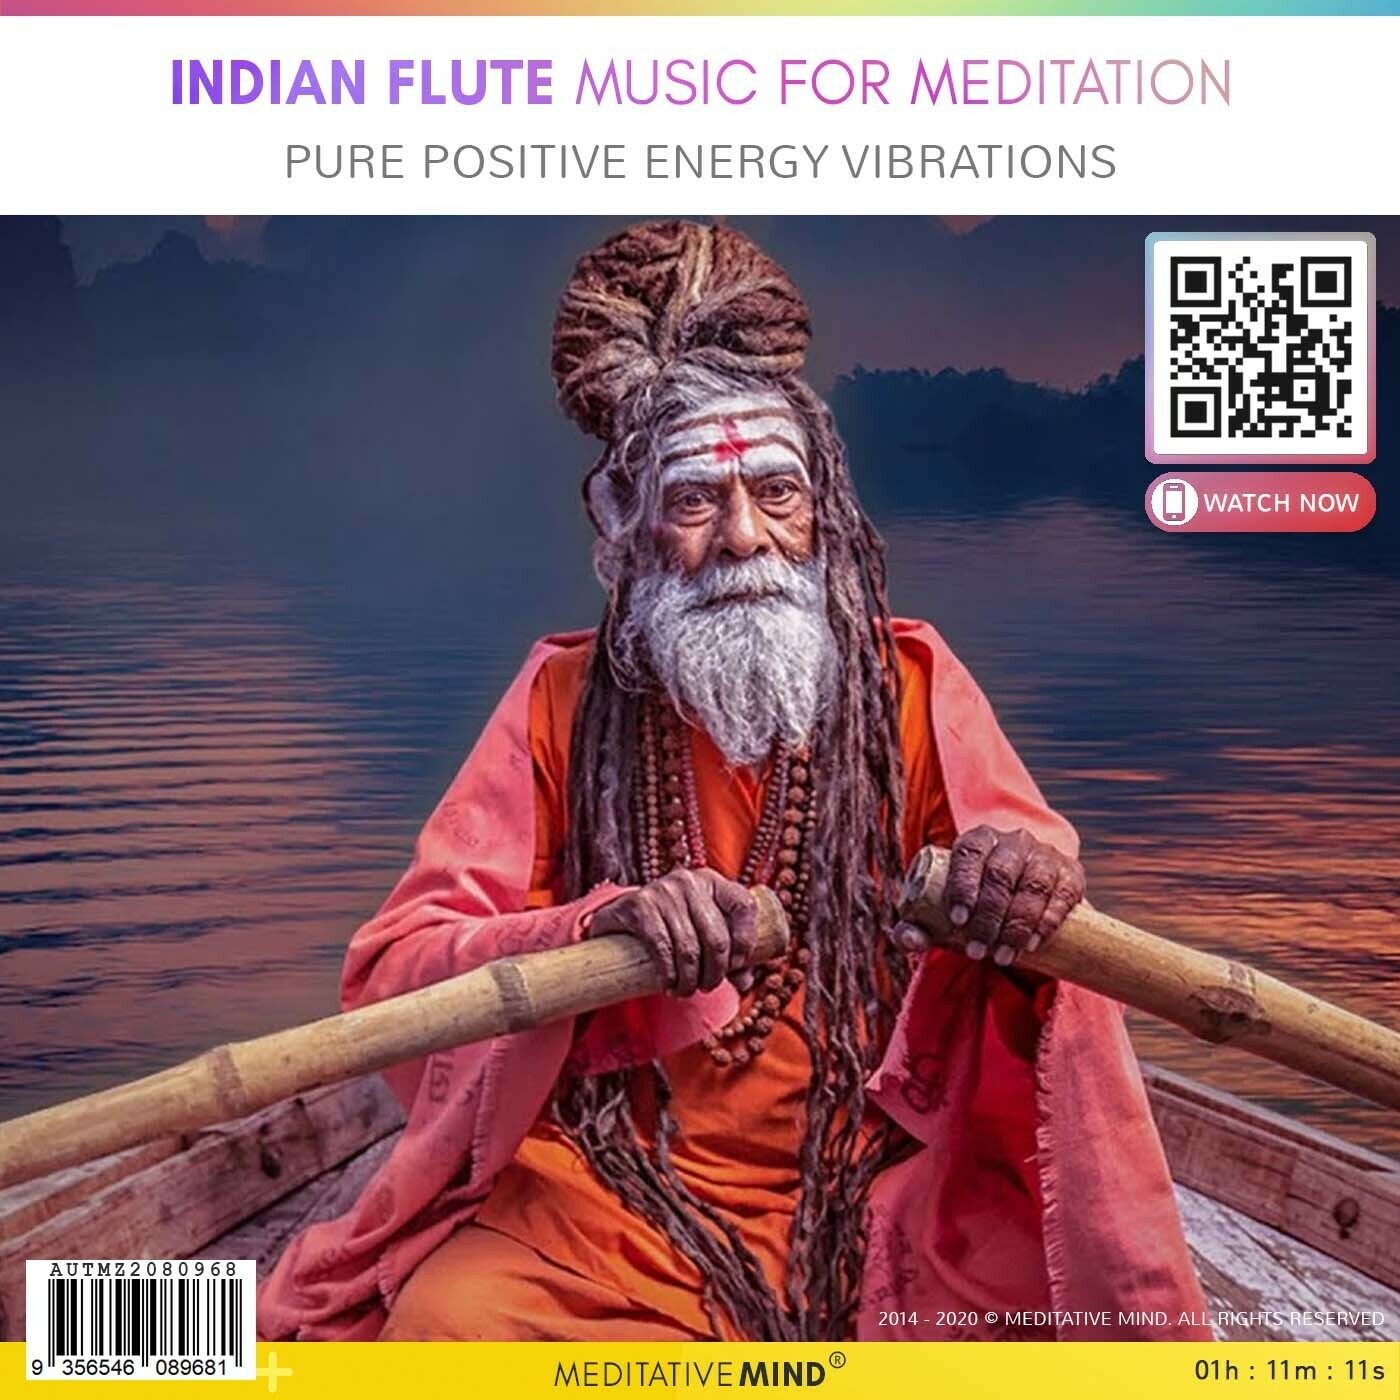 Indian Flute Music for Meditation - Pure Positive Energy Vibrations